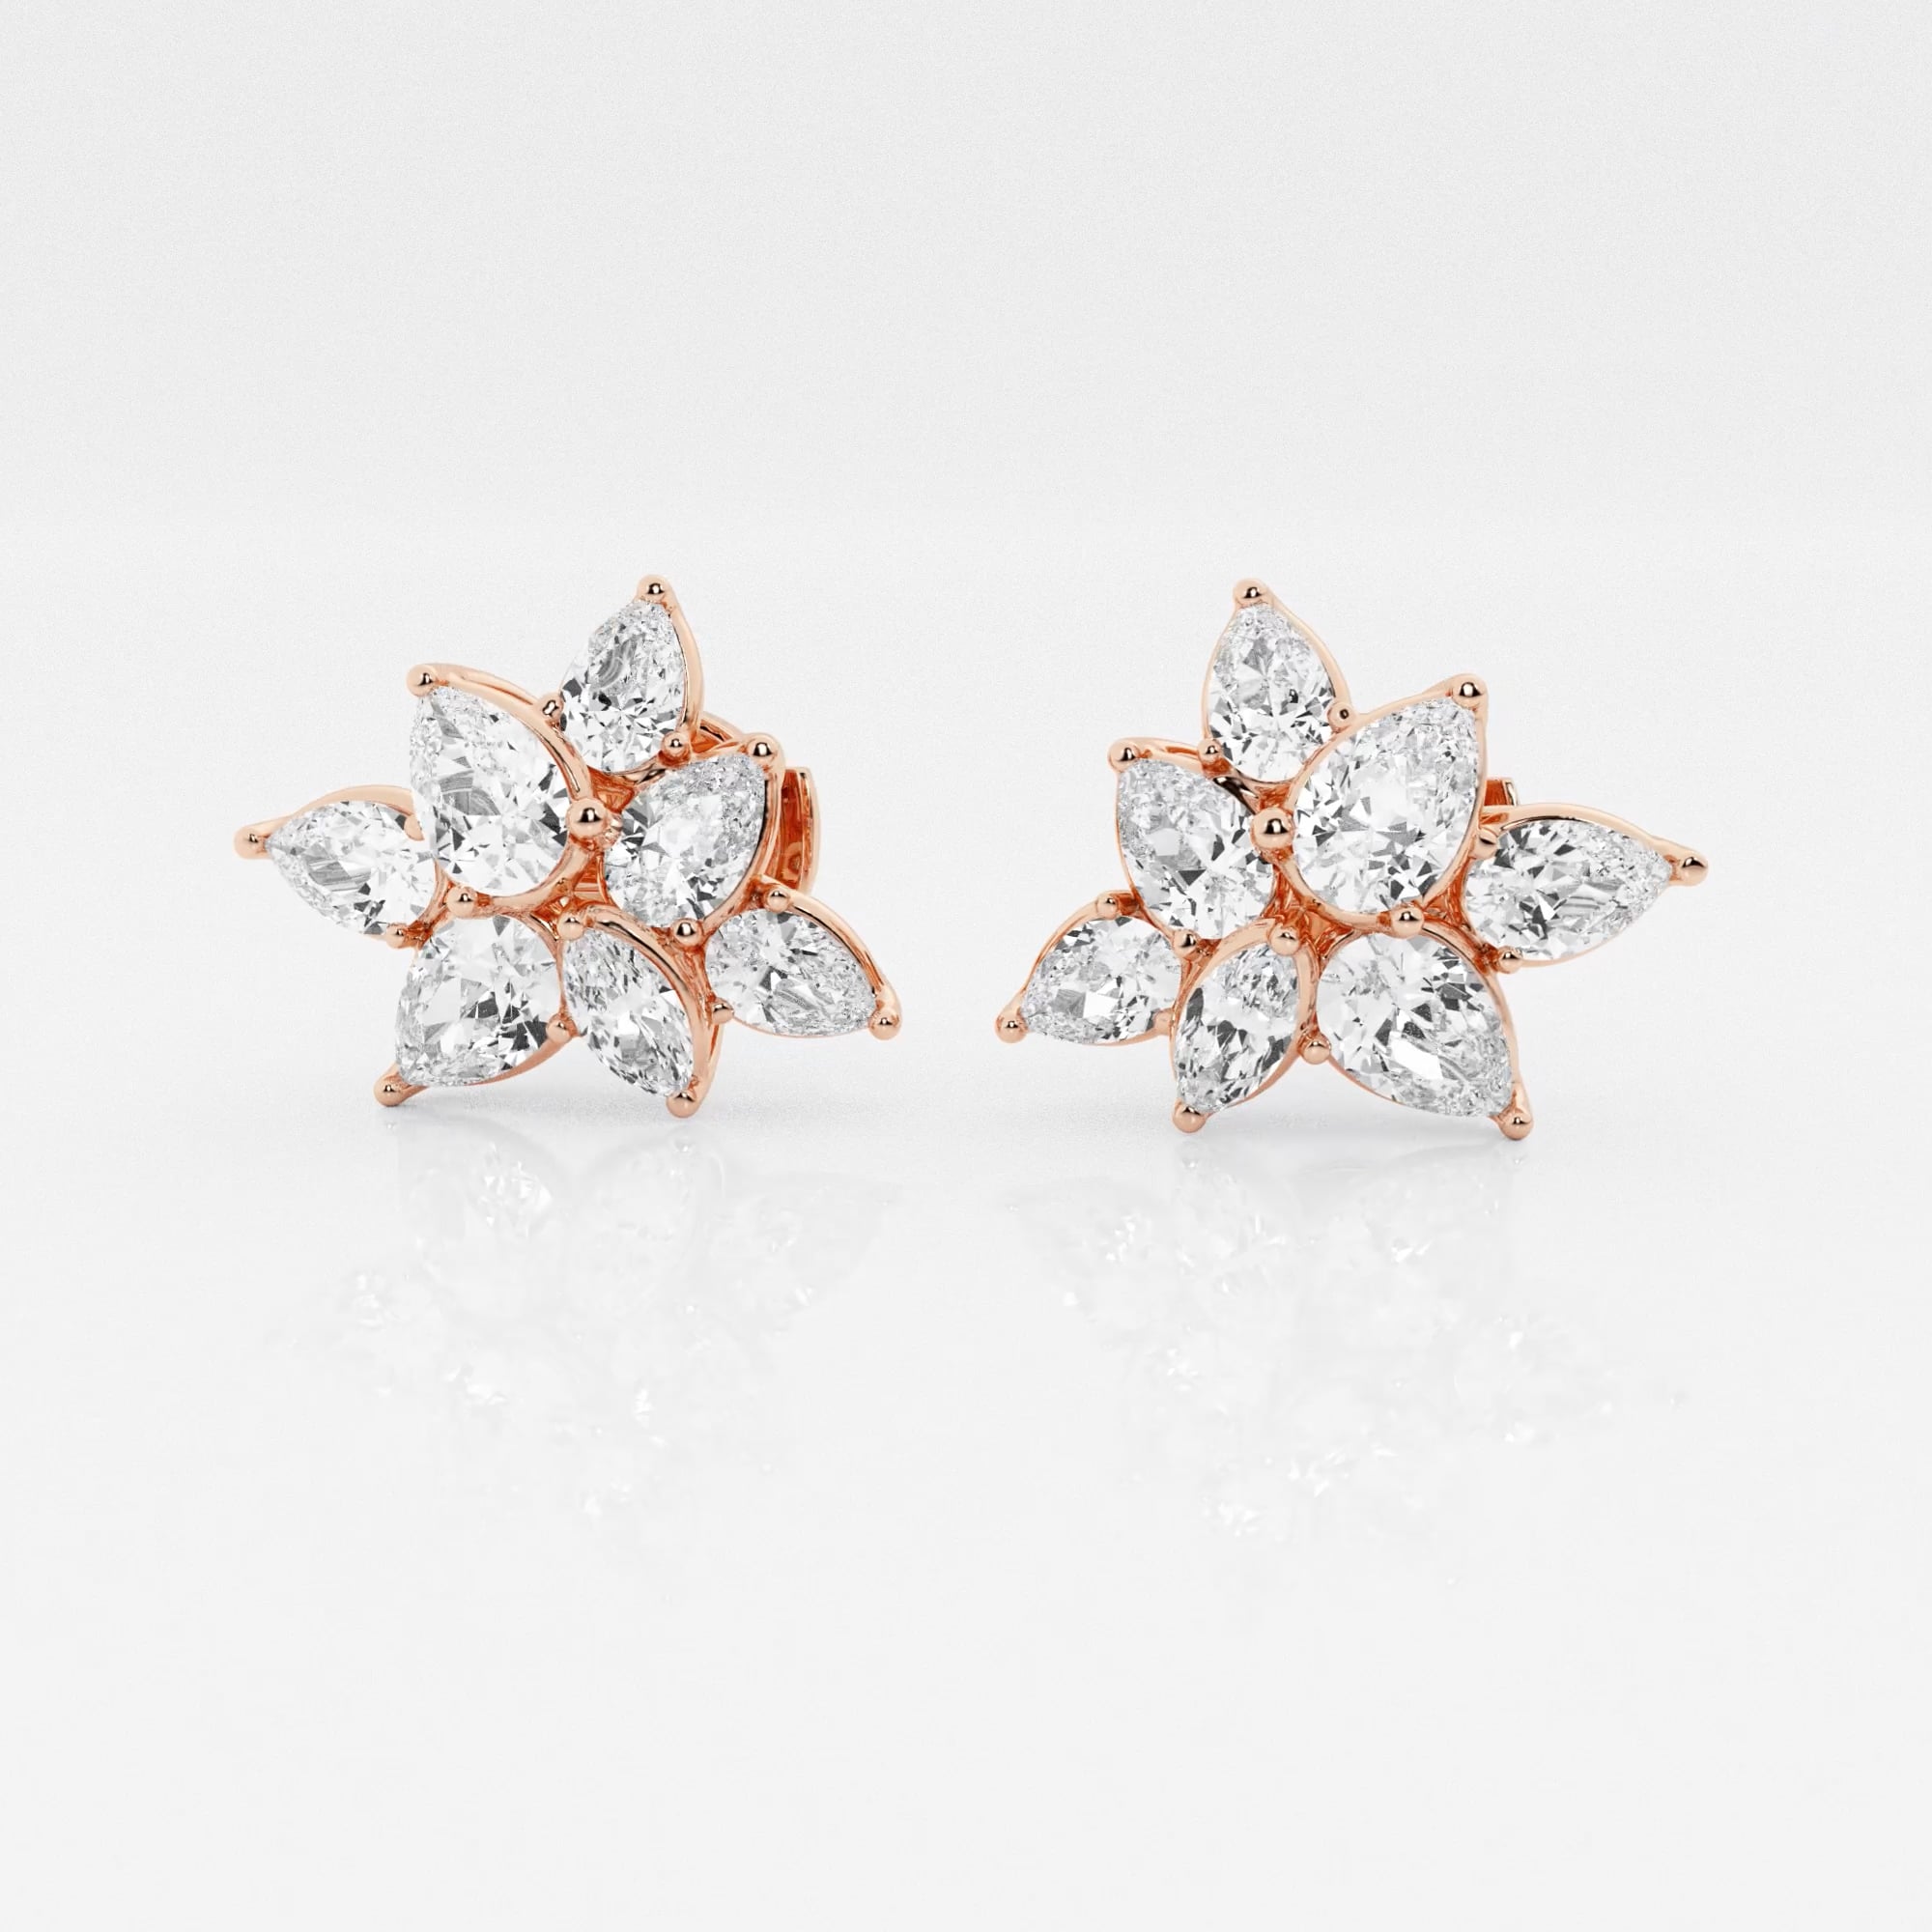 product video for Badgley Mischka 2 1/2 ctw Pear & Marquise Lab Grown Diamond Cluster Fashion Stud Earring